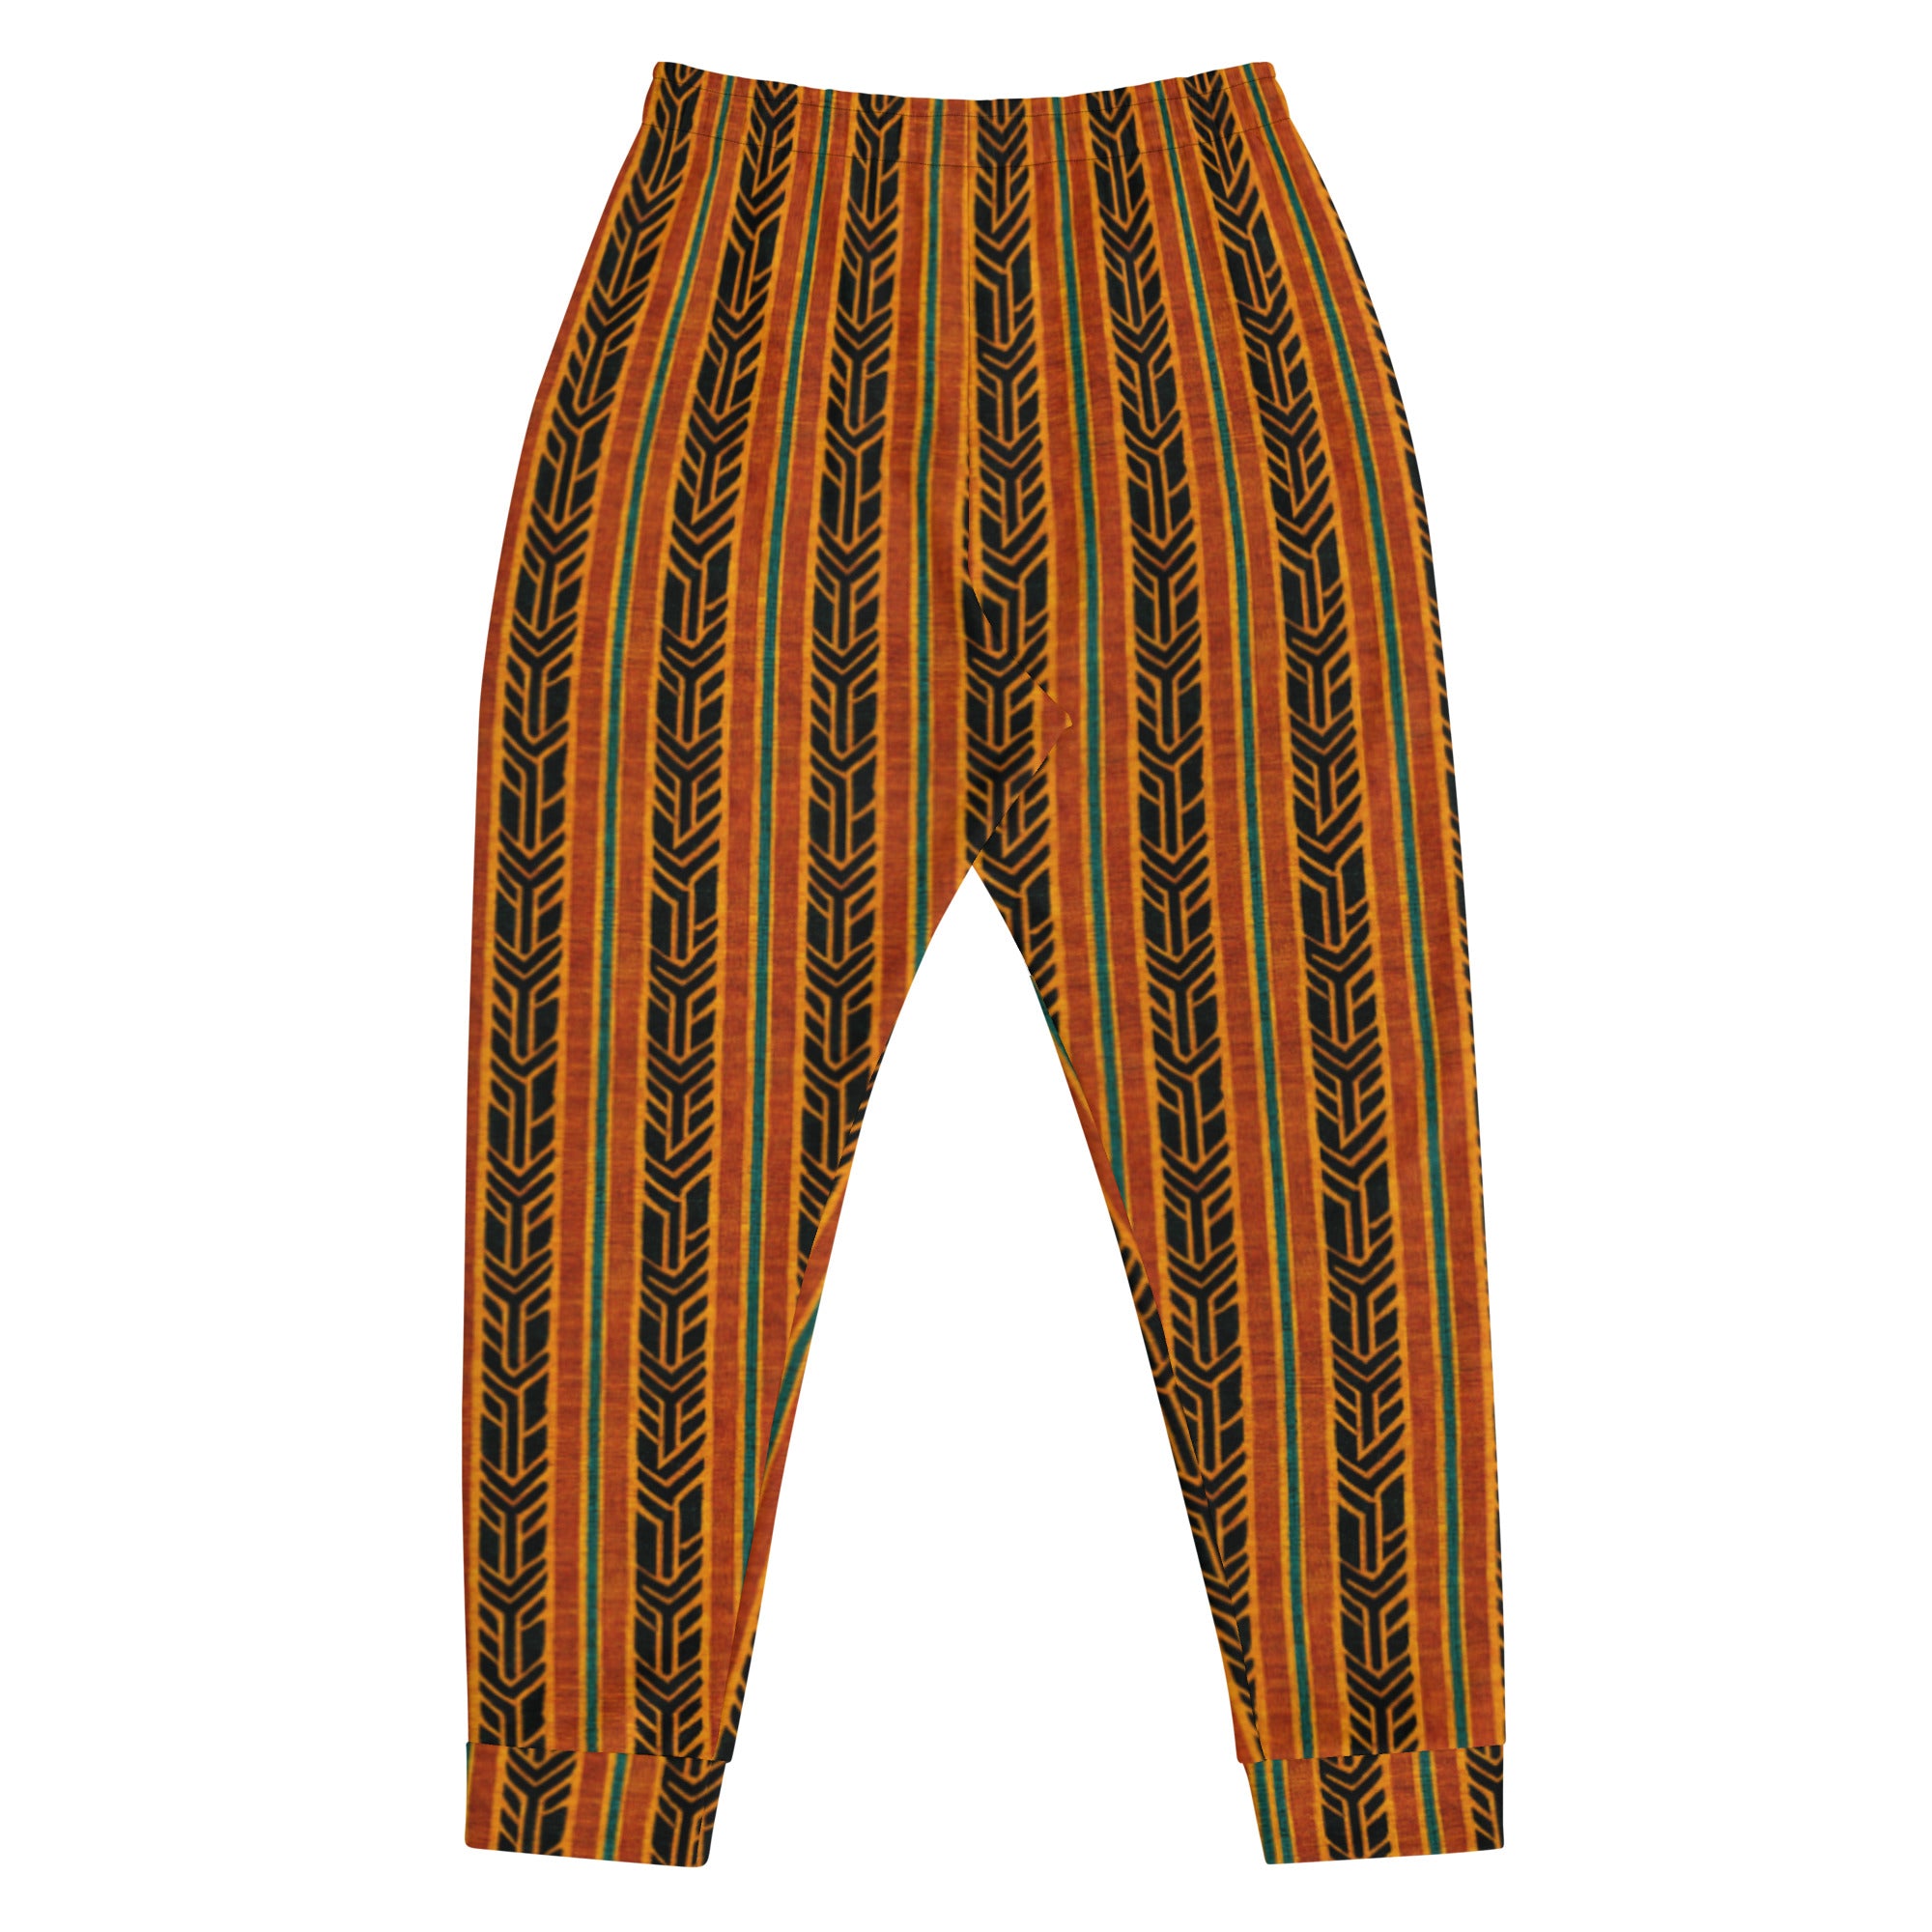 Back to Africa Men's Joggers